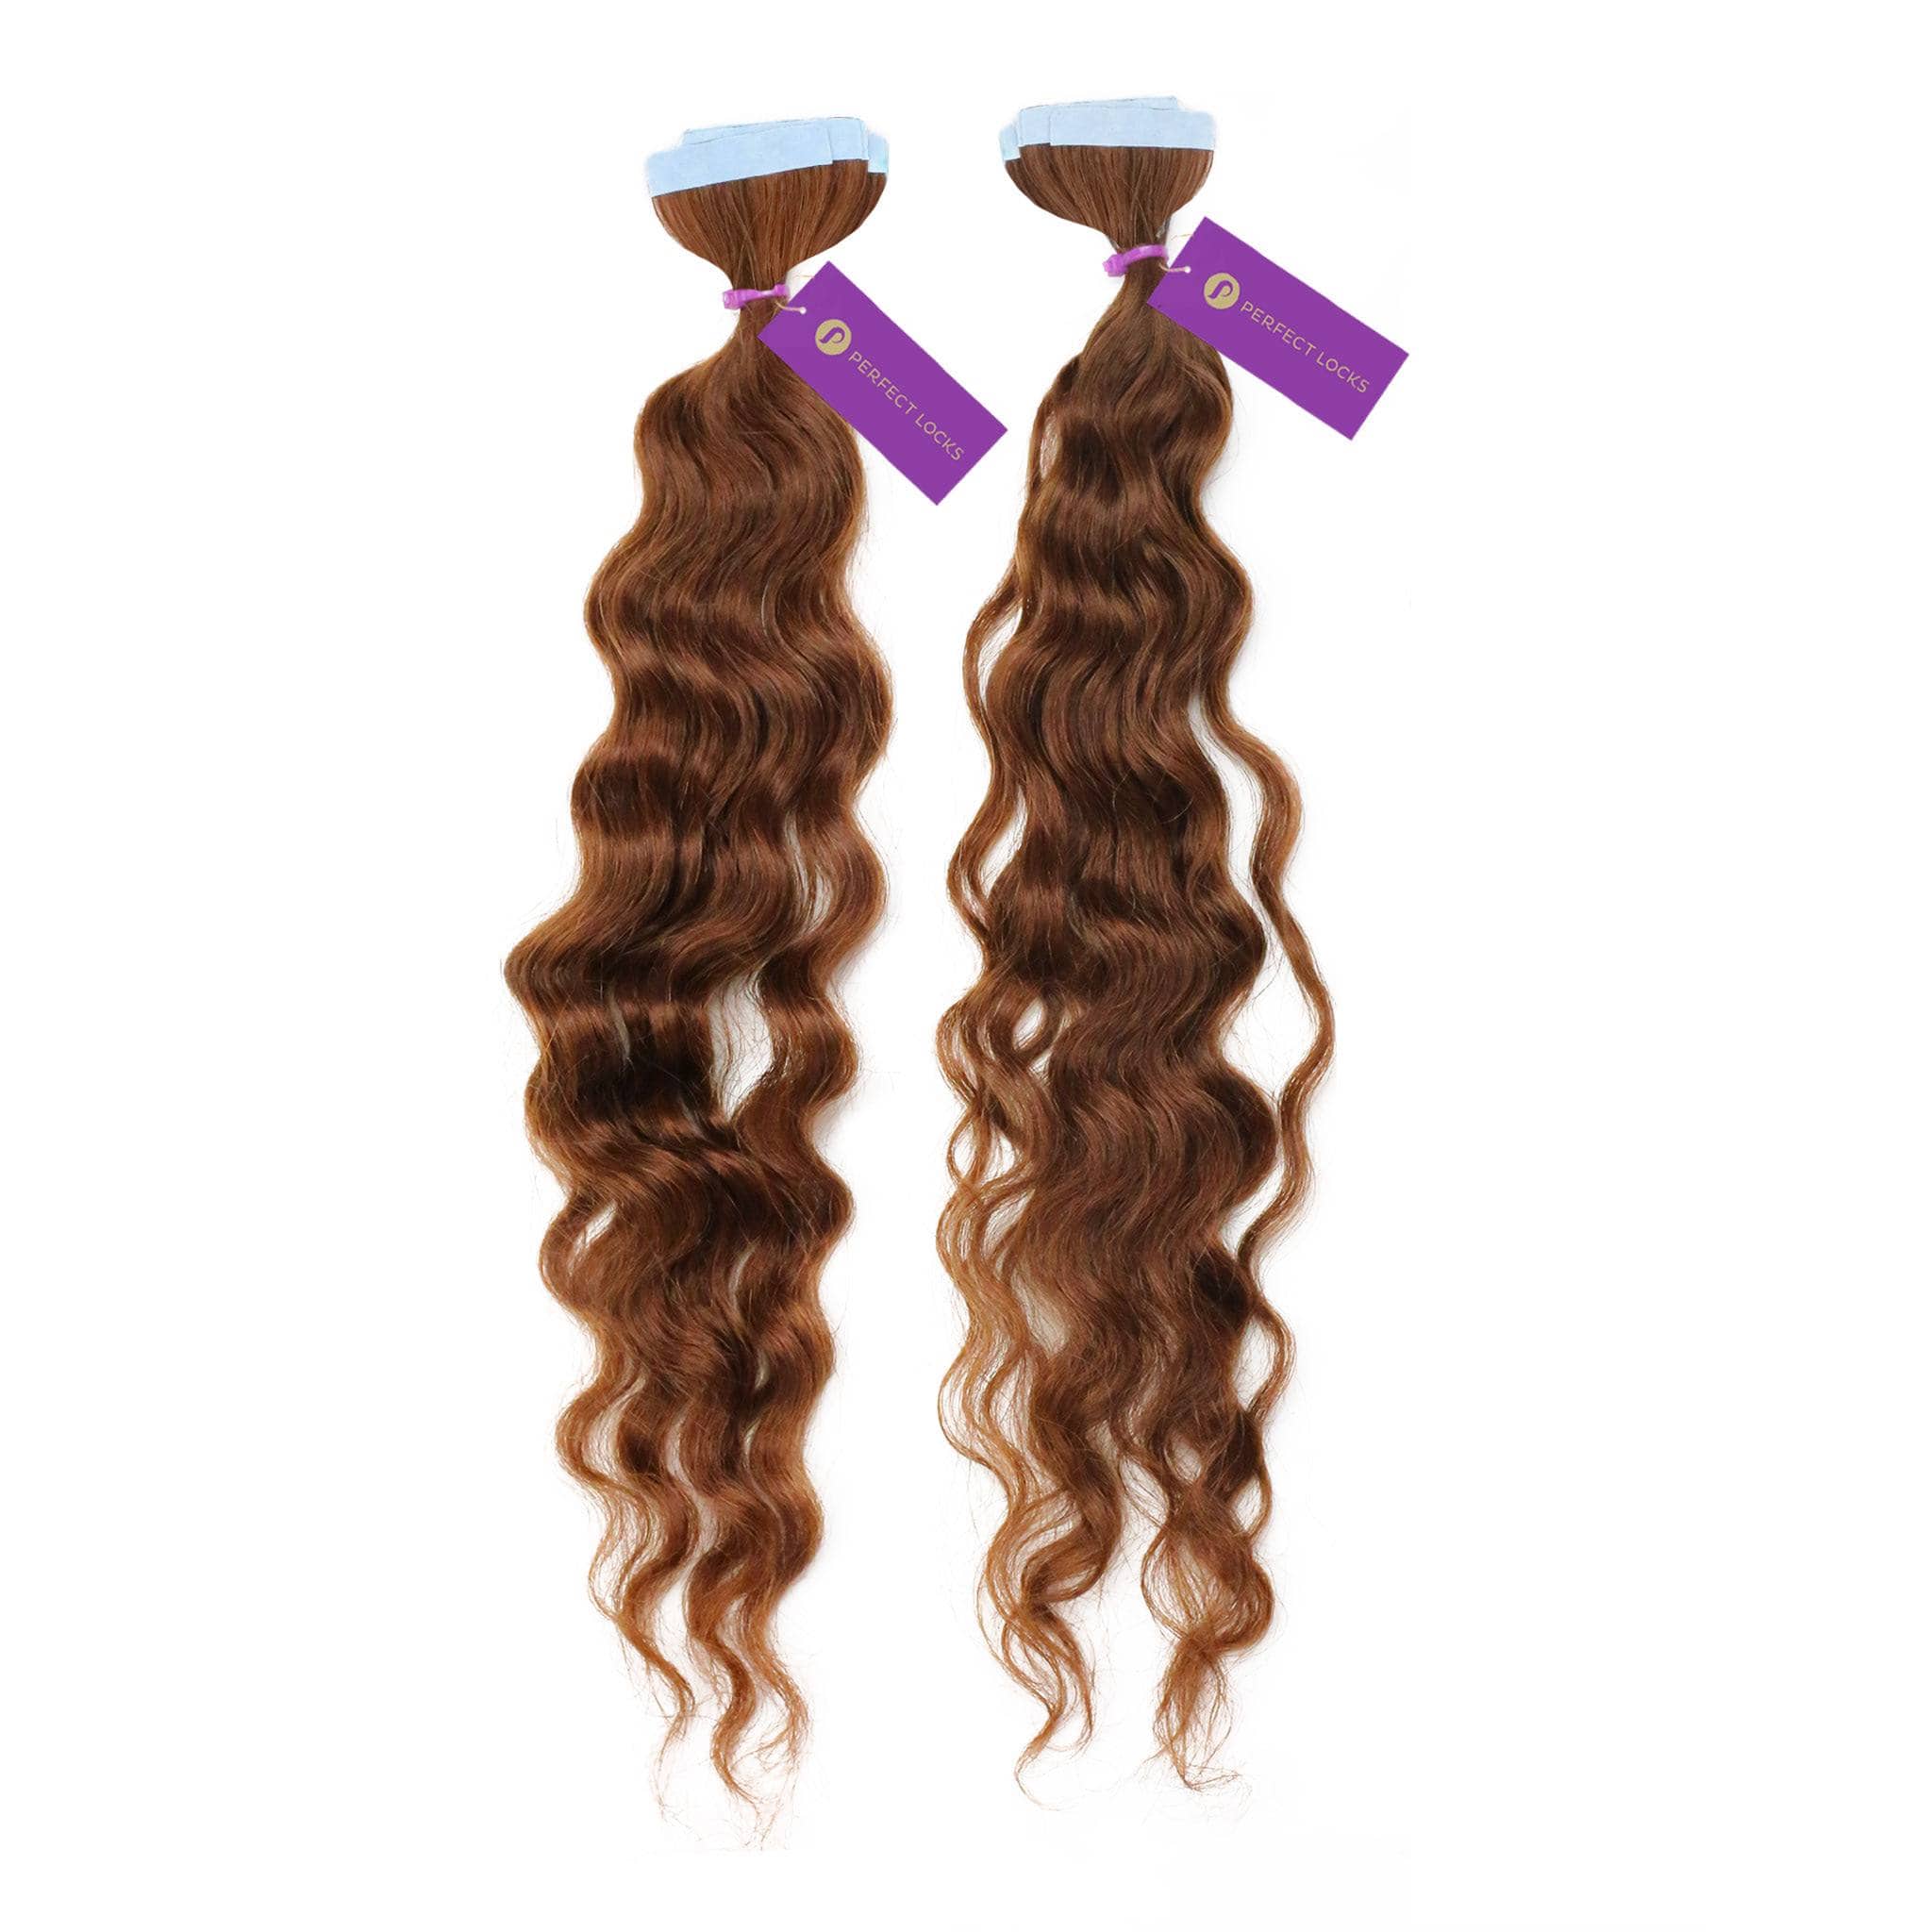 Pepper Highlights - Half Up Curls Extension's Code & Price - RblxTrade